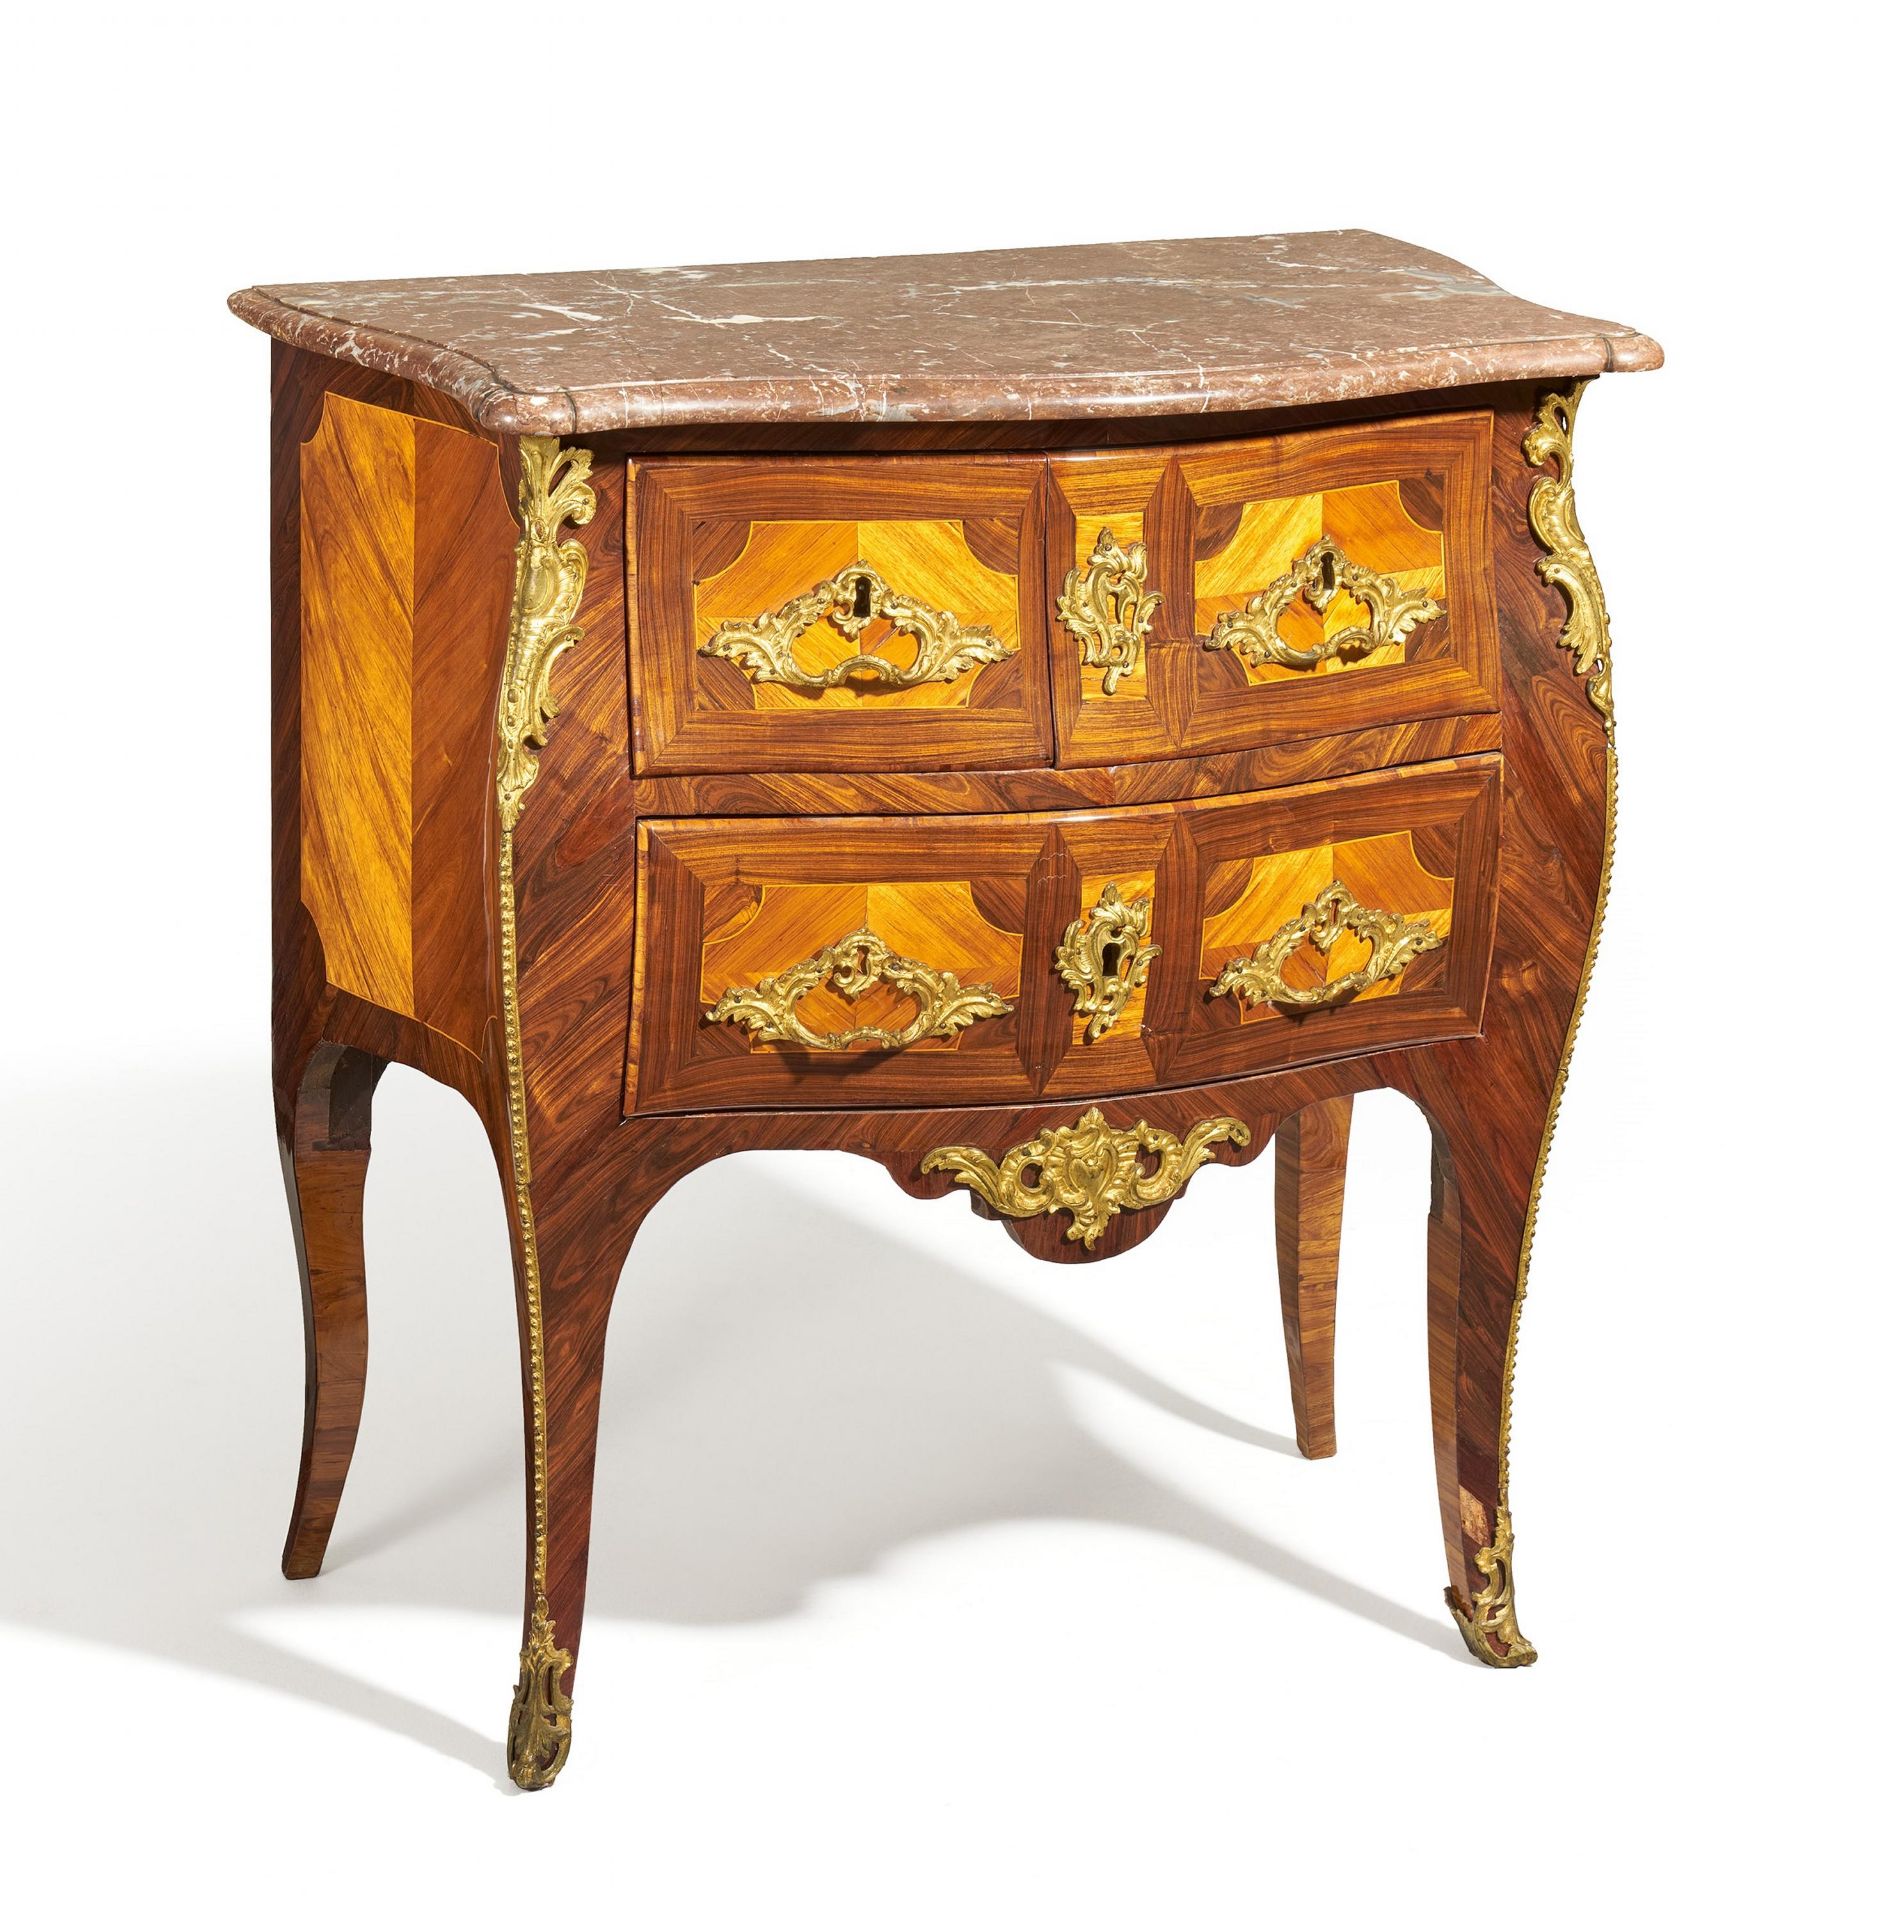 Kingwood and rosewood chest of drawers Louis XV